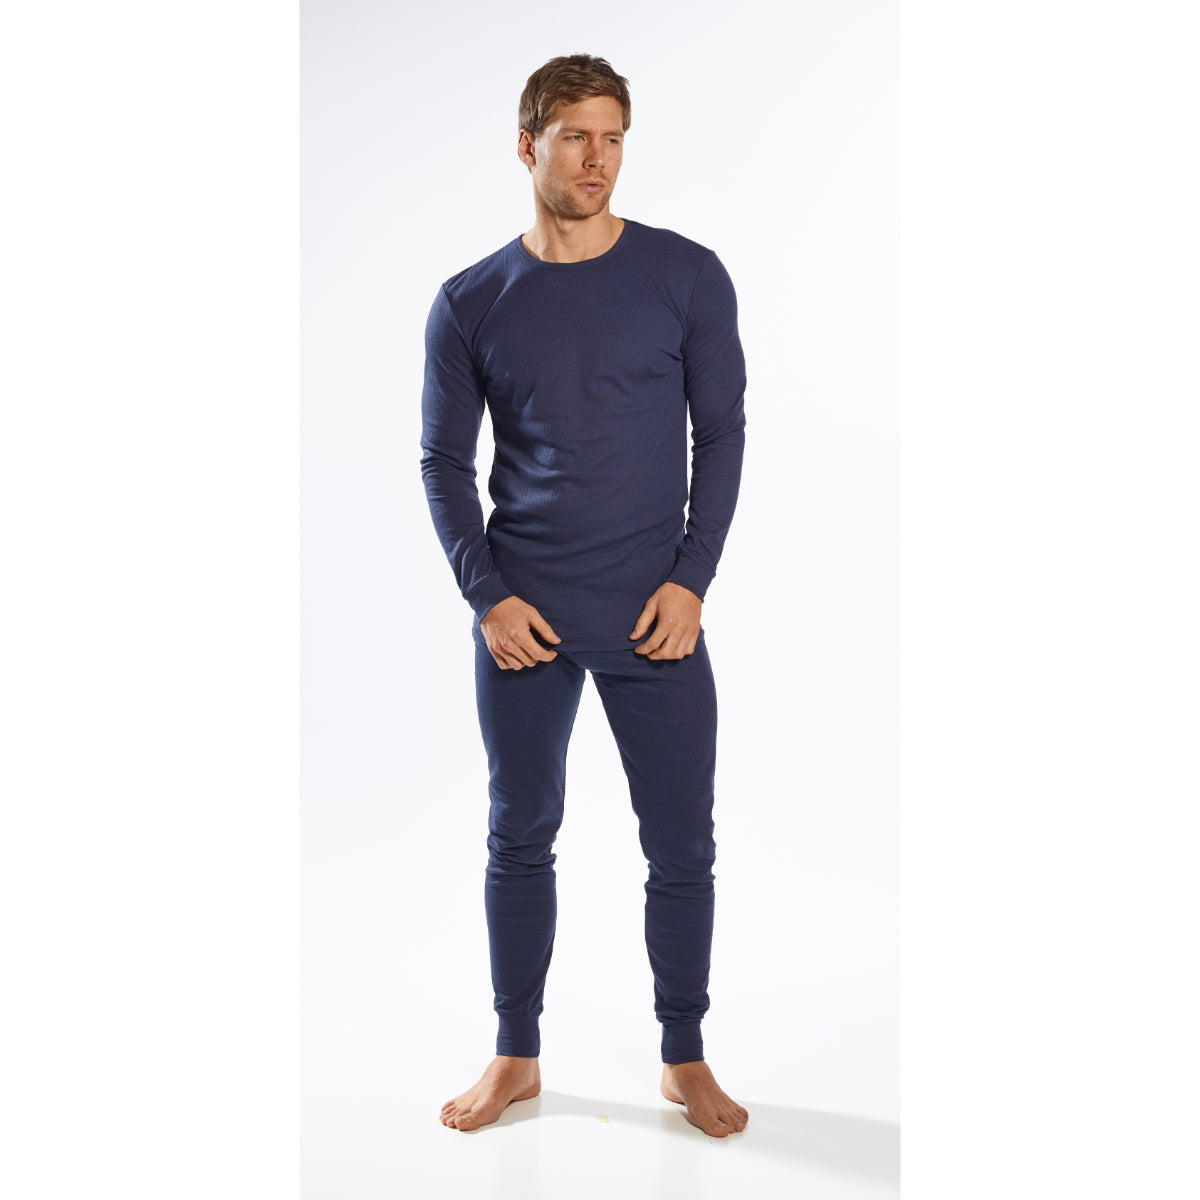 Portwest B123 Thermal T-Shirt Long Sleeve for Baselayer